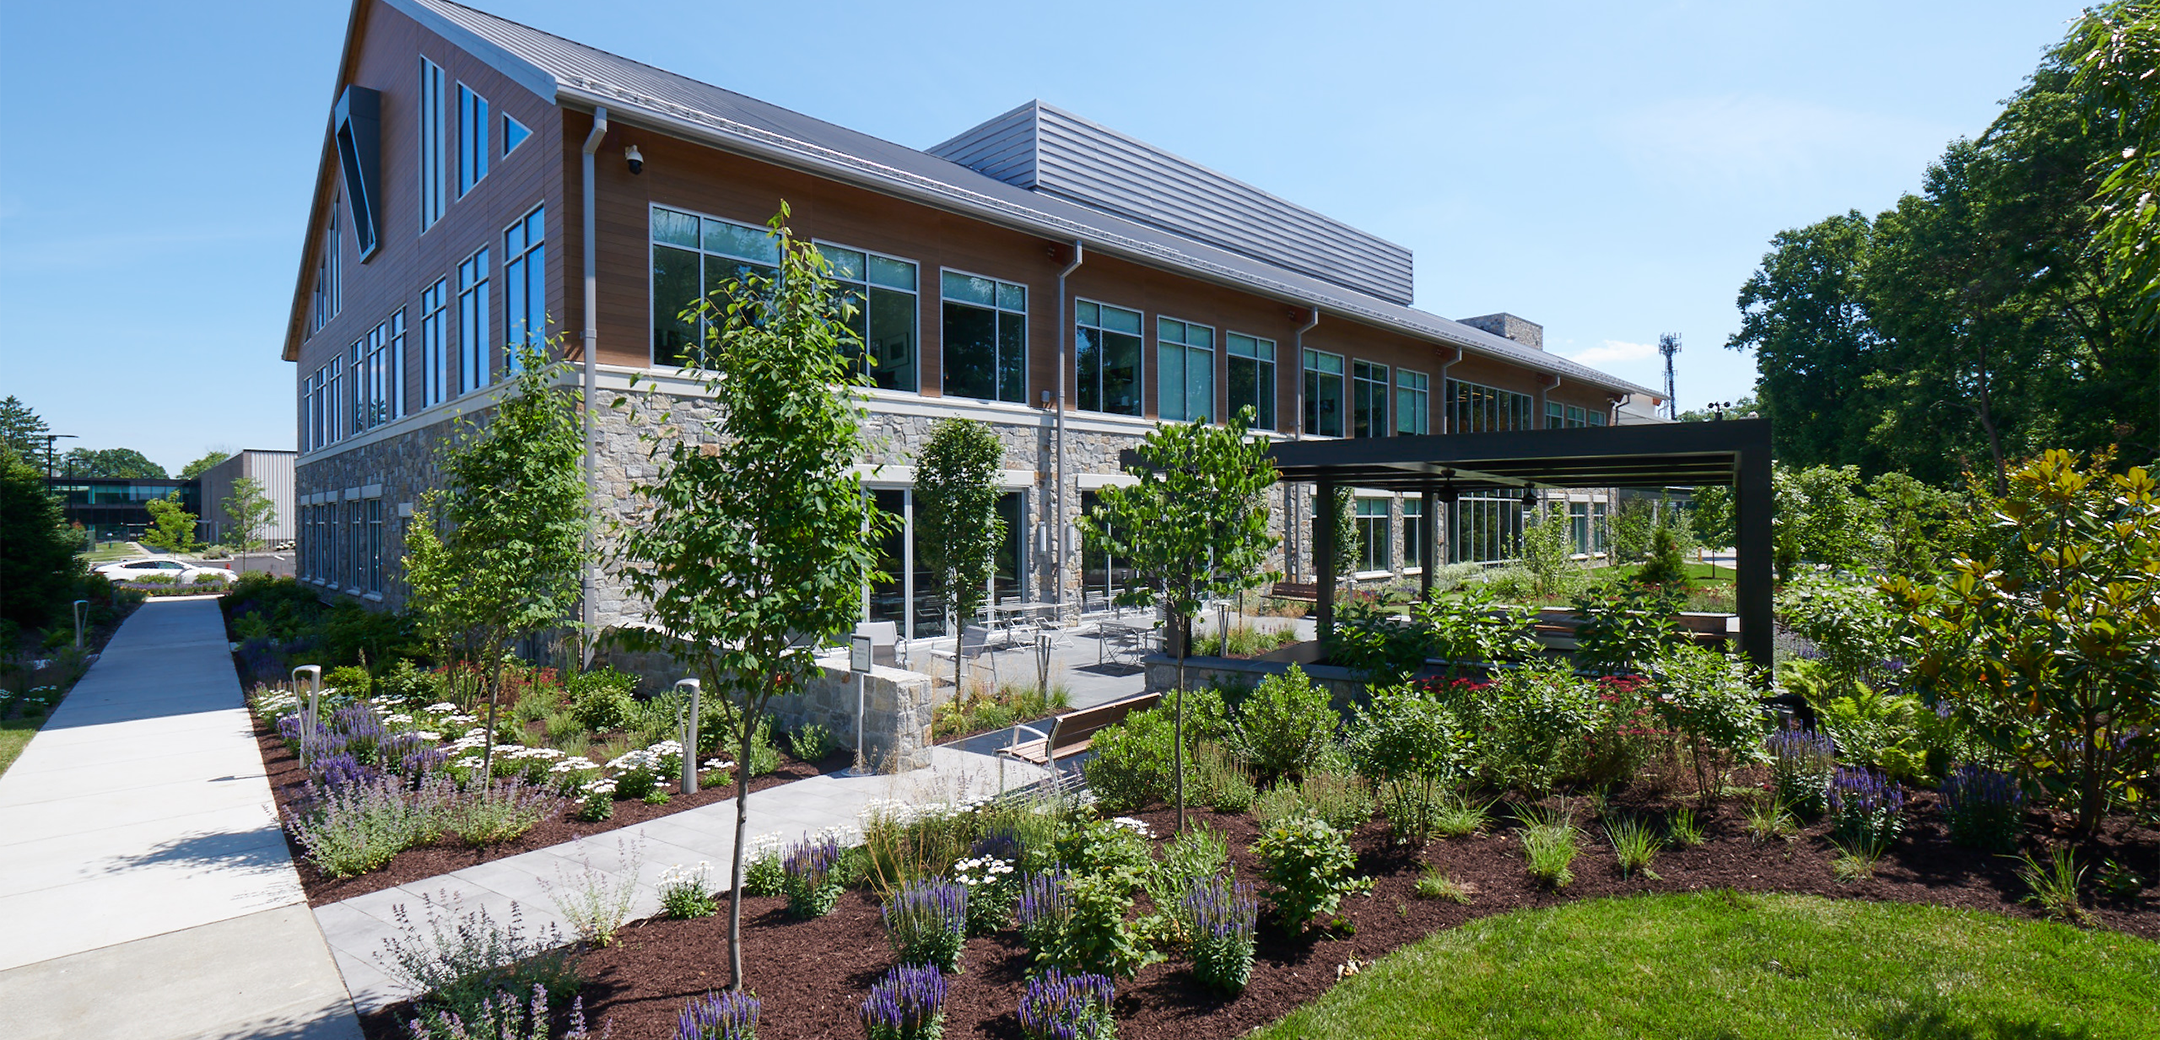 The back view of Equus Capital Partners headquarters featuring the landscaping and patio in front.